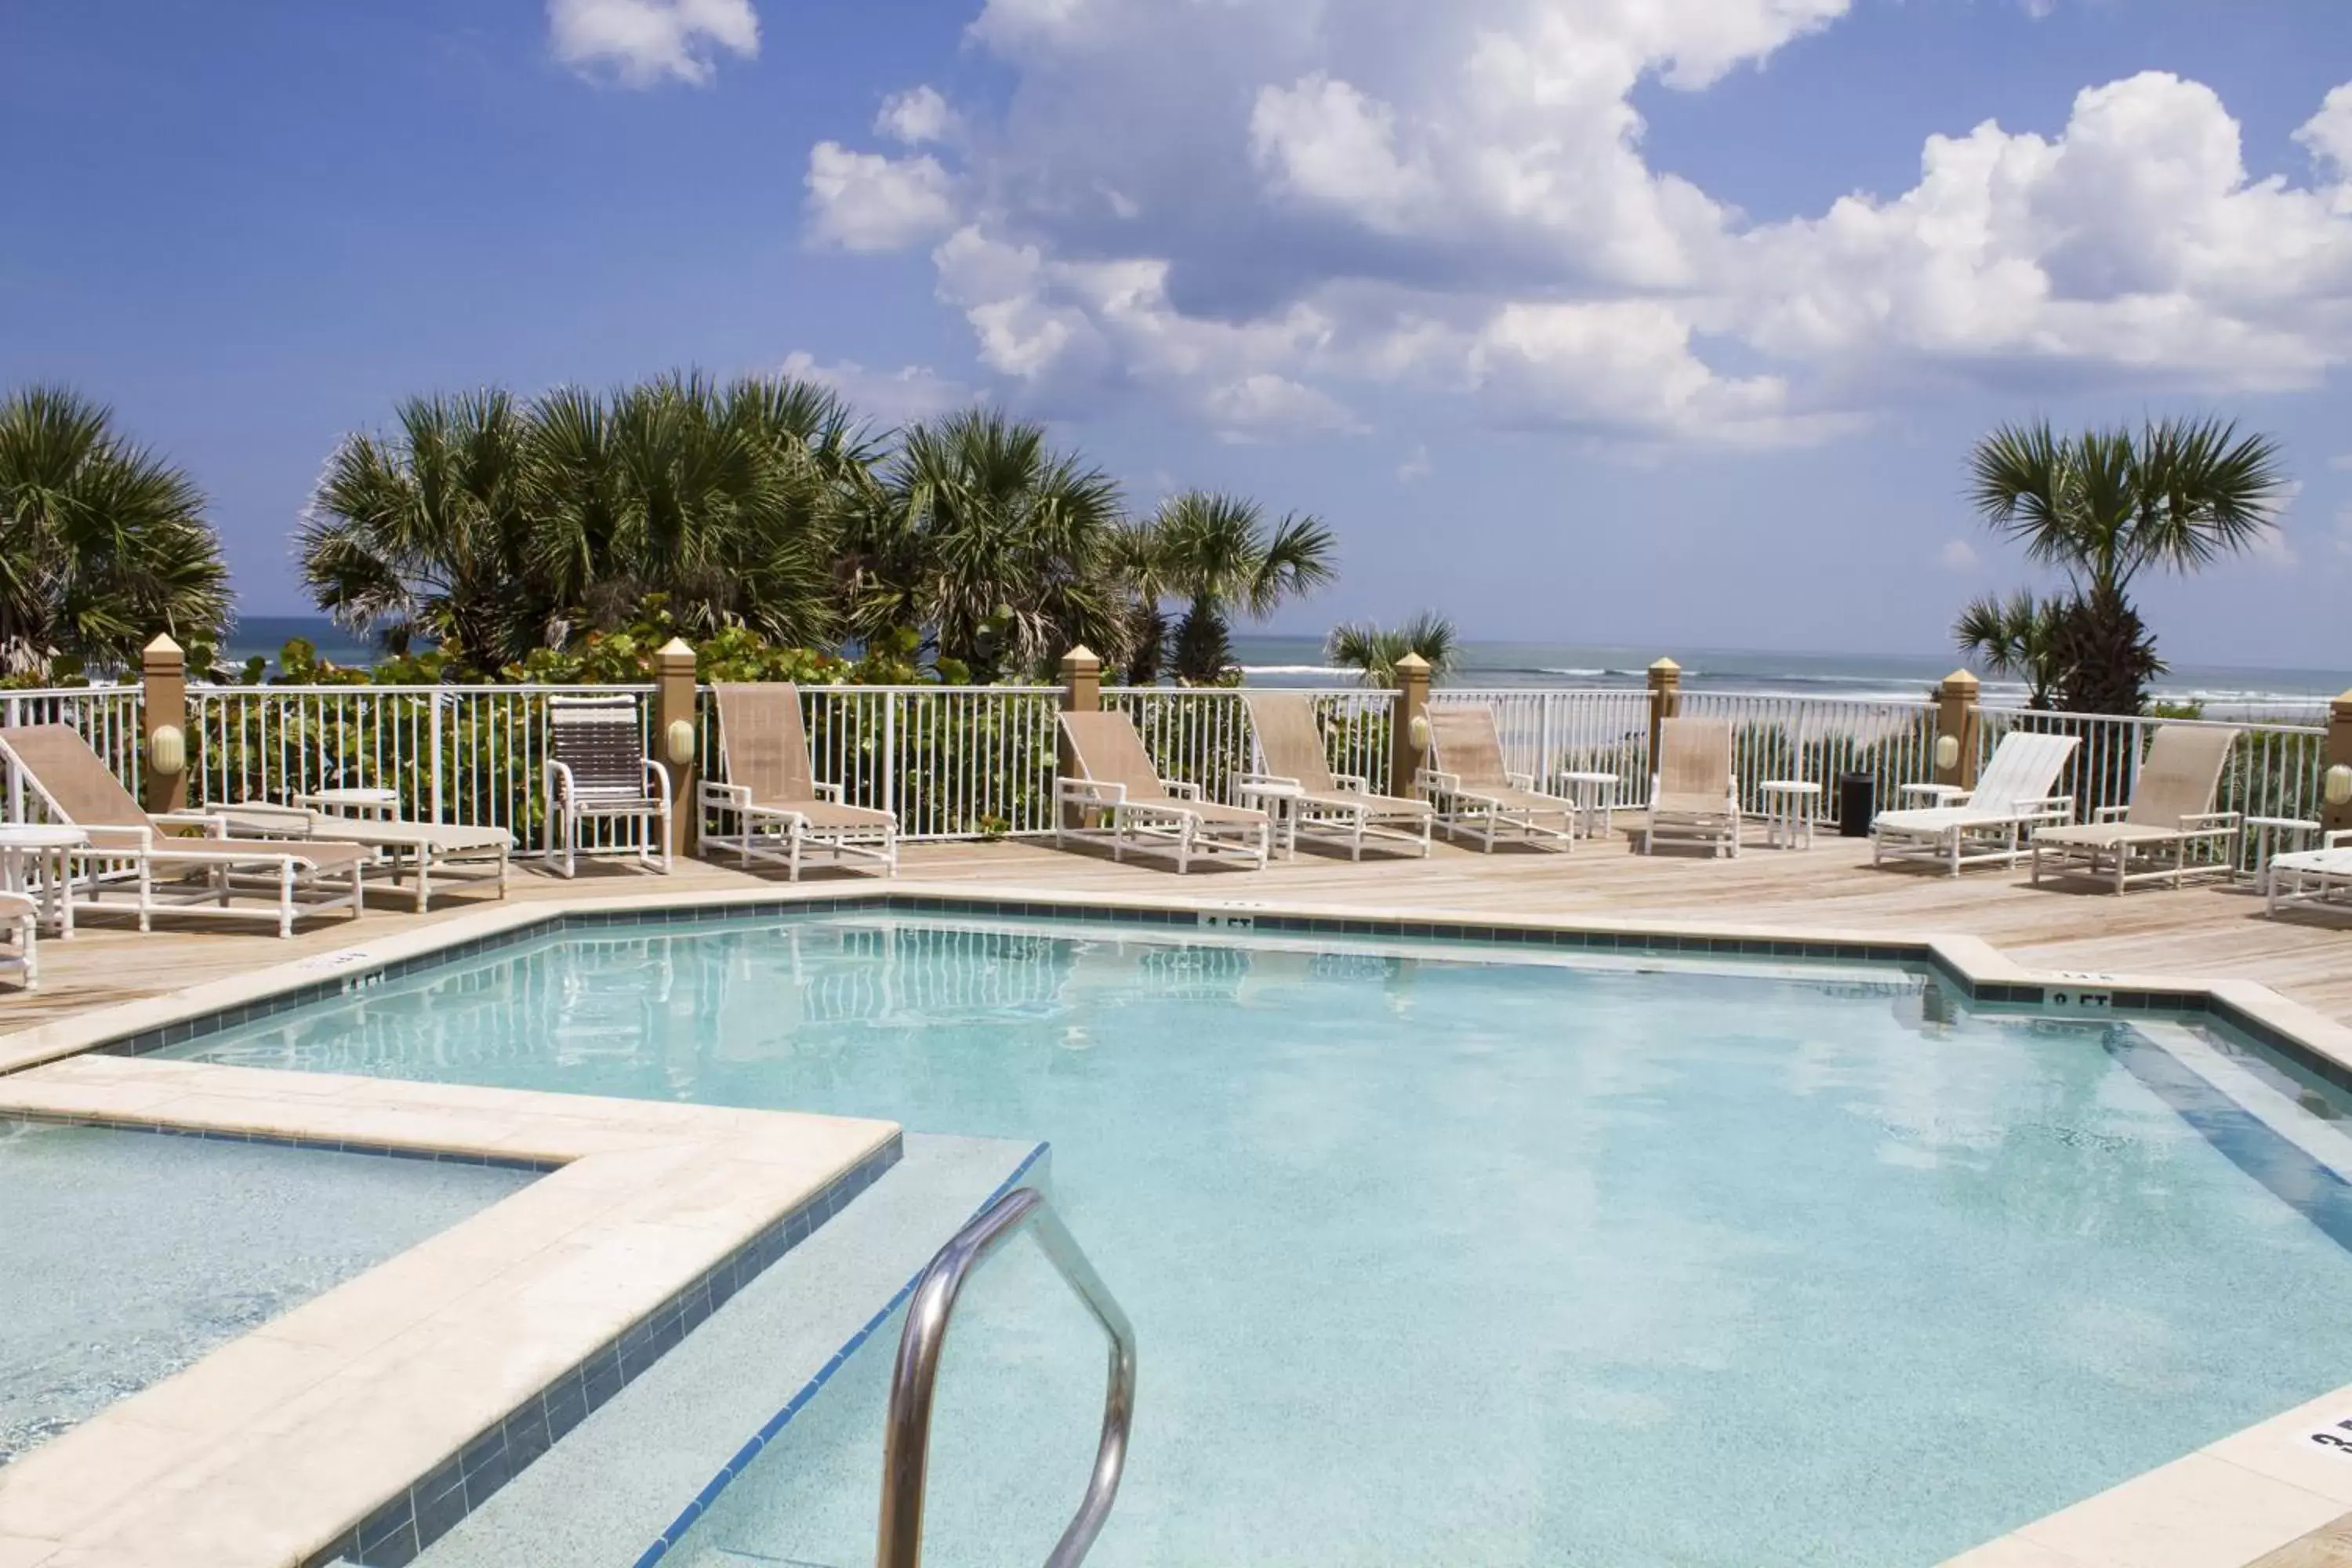 Swimming Pool in New Smyrna Waves by Exploria Resorts